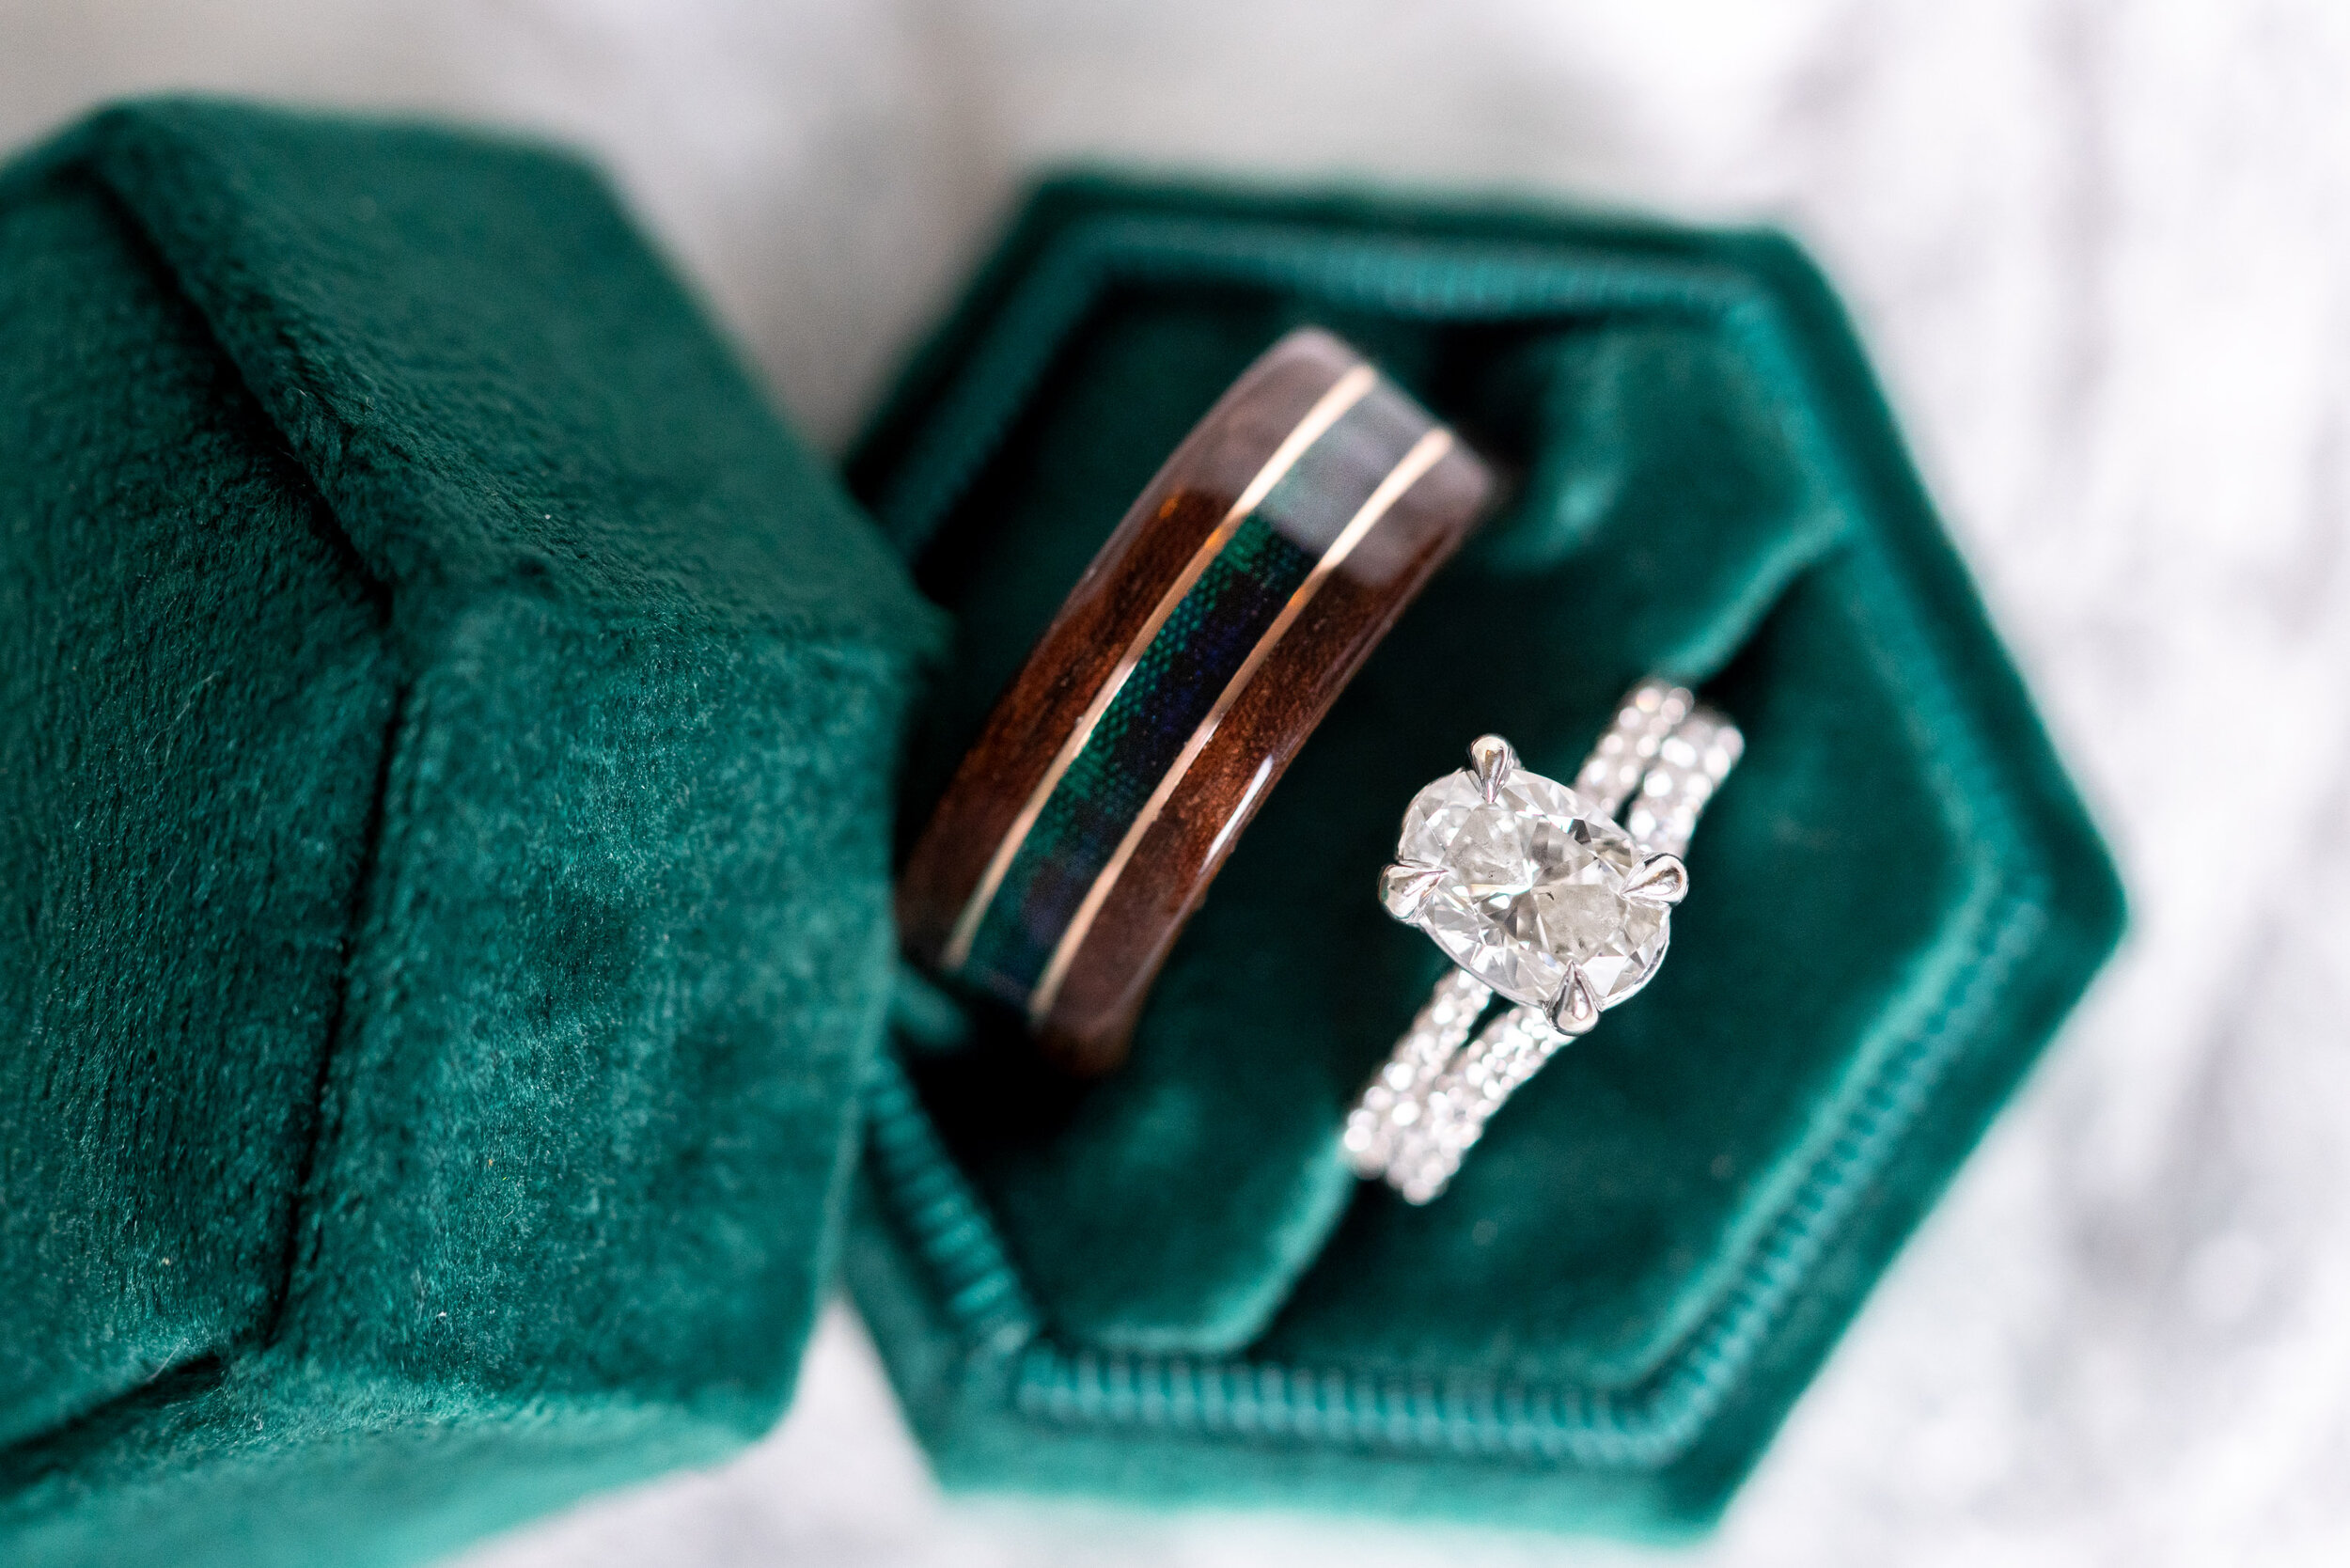 Oval engagement ring, diamond band, and wooden band in emerald velvet box